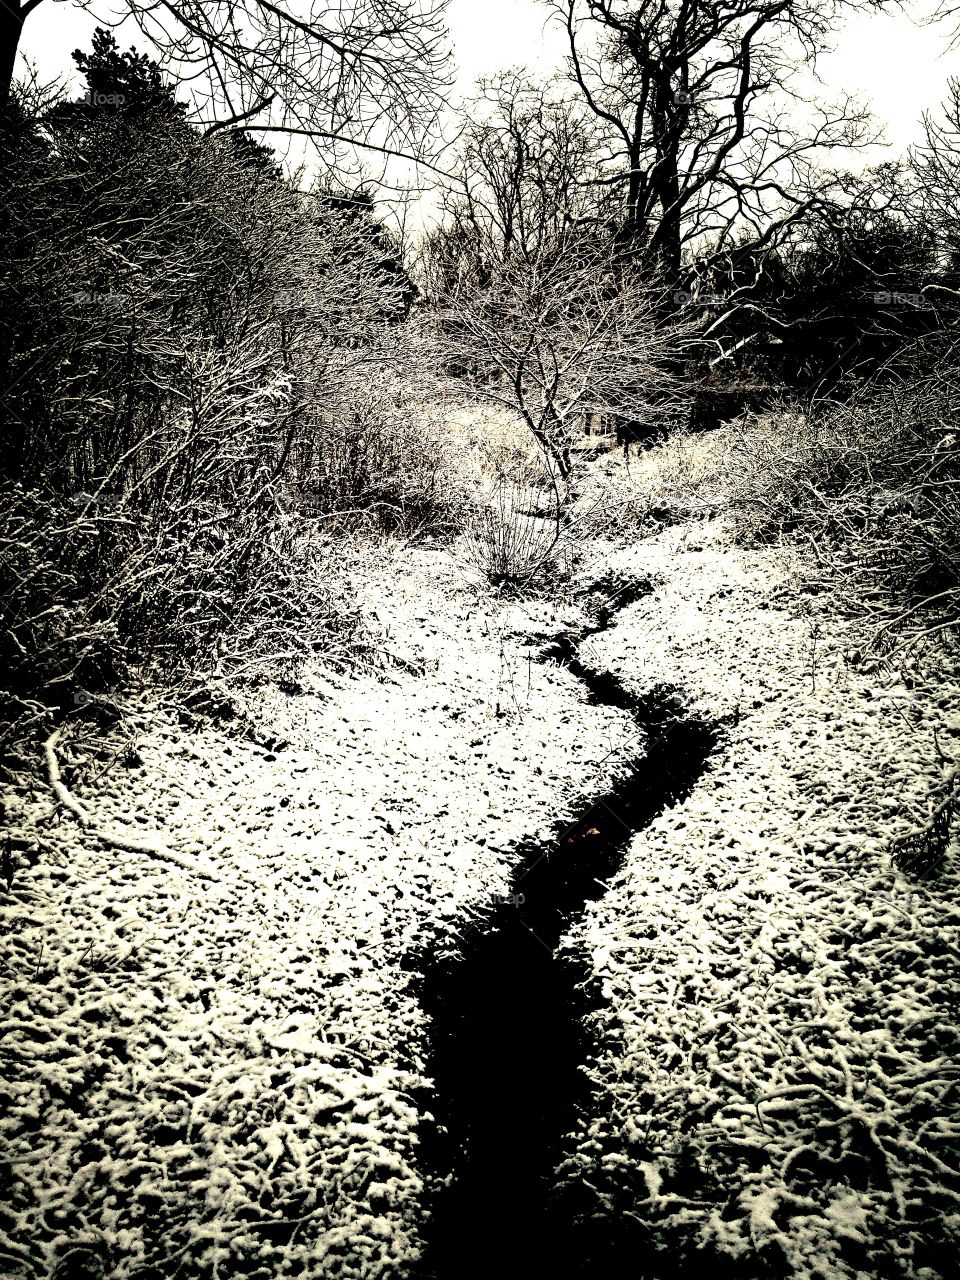 Winter Pattern. Streambed pattern after snow